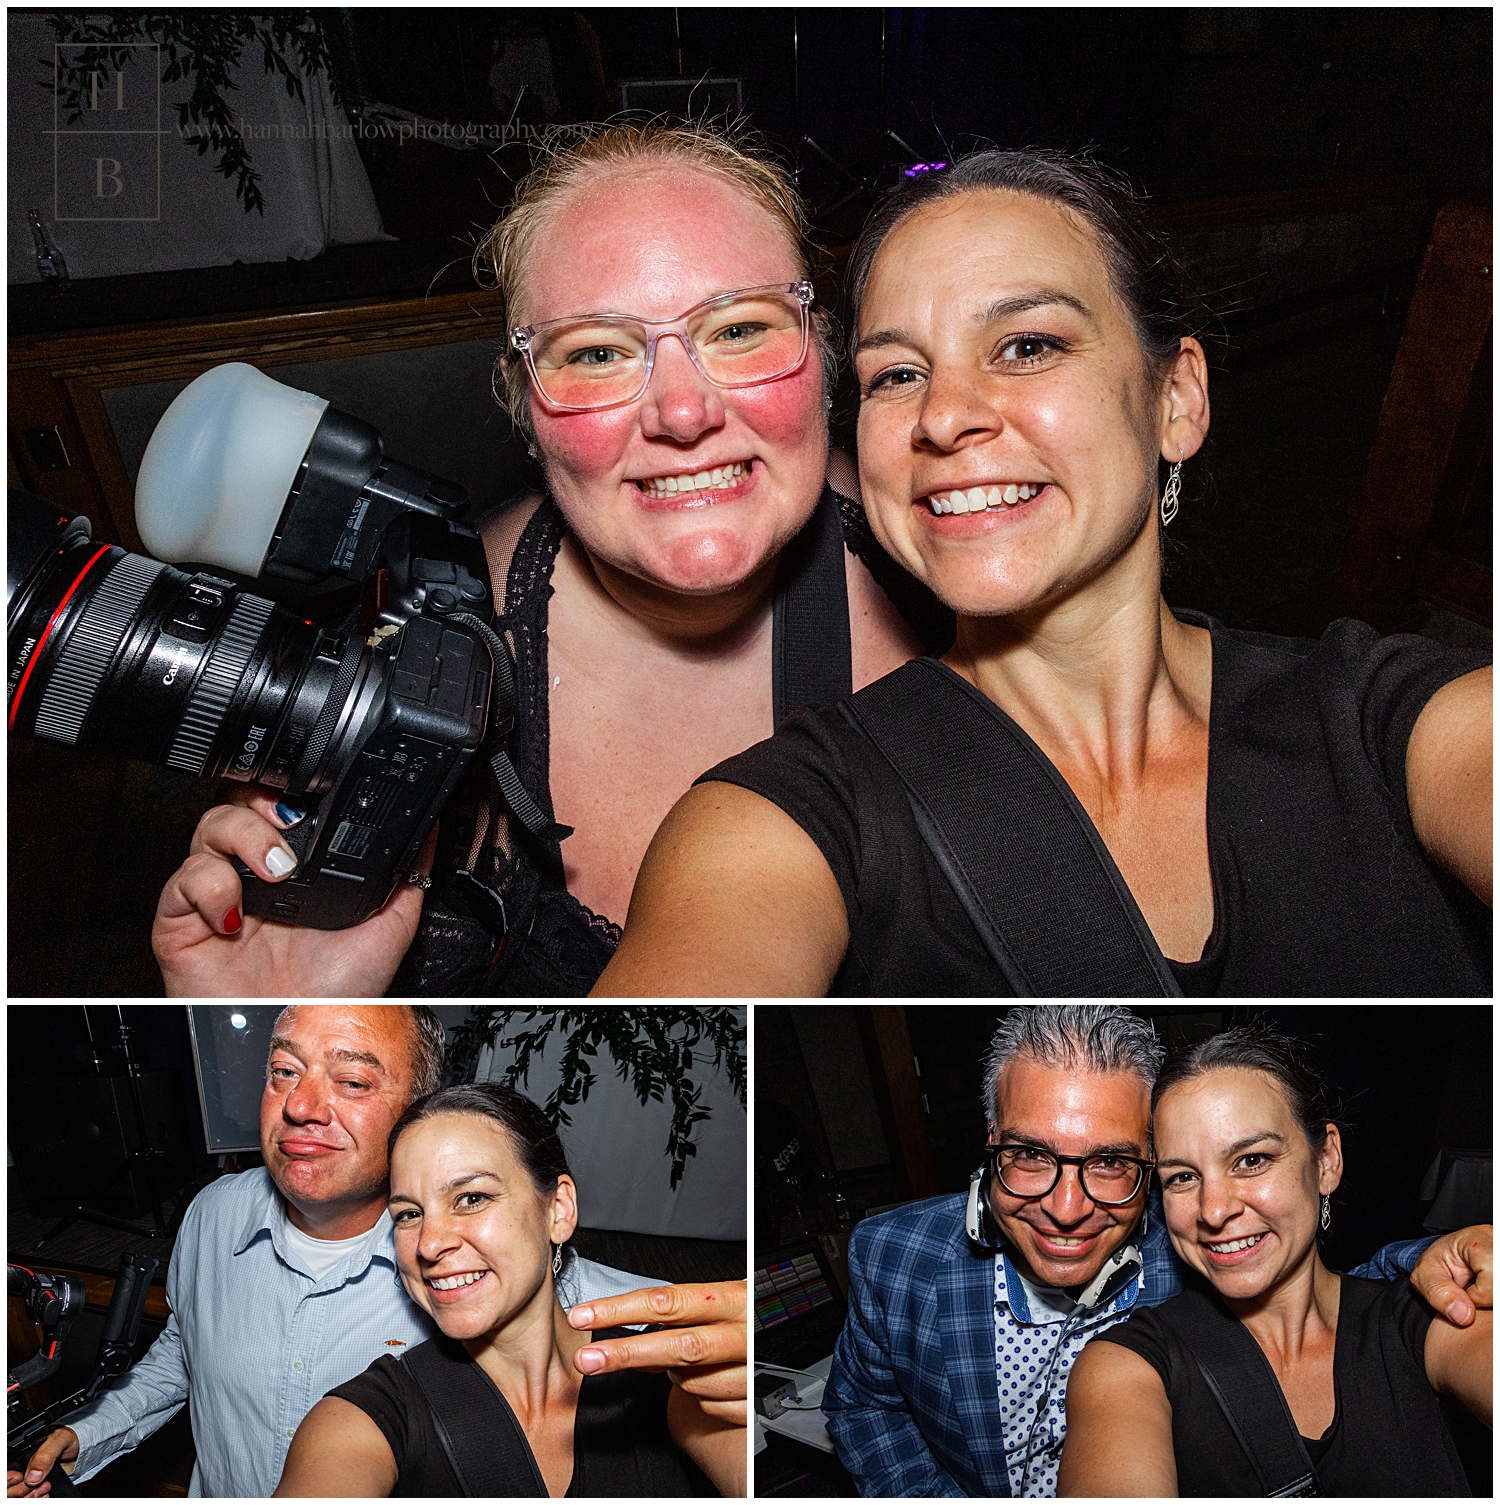 Collage of photographer taking selfies with second photographer and DJ.